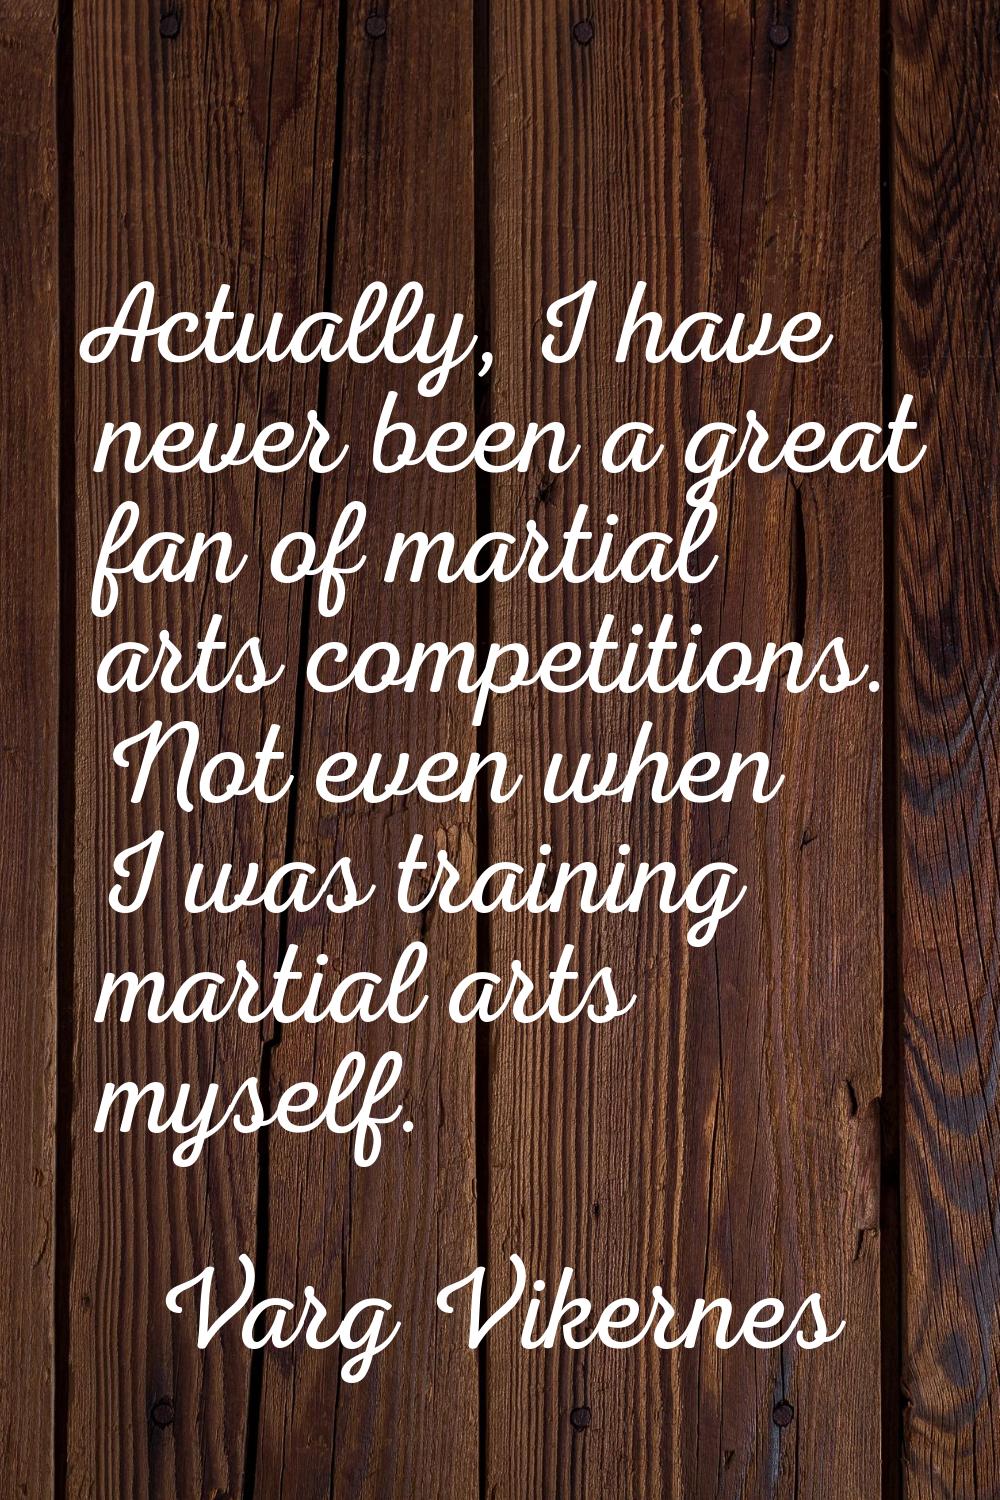 Actually, I have never been a great fan of martial arts competitions. Not even when I was training 